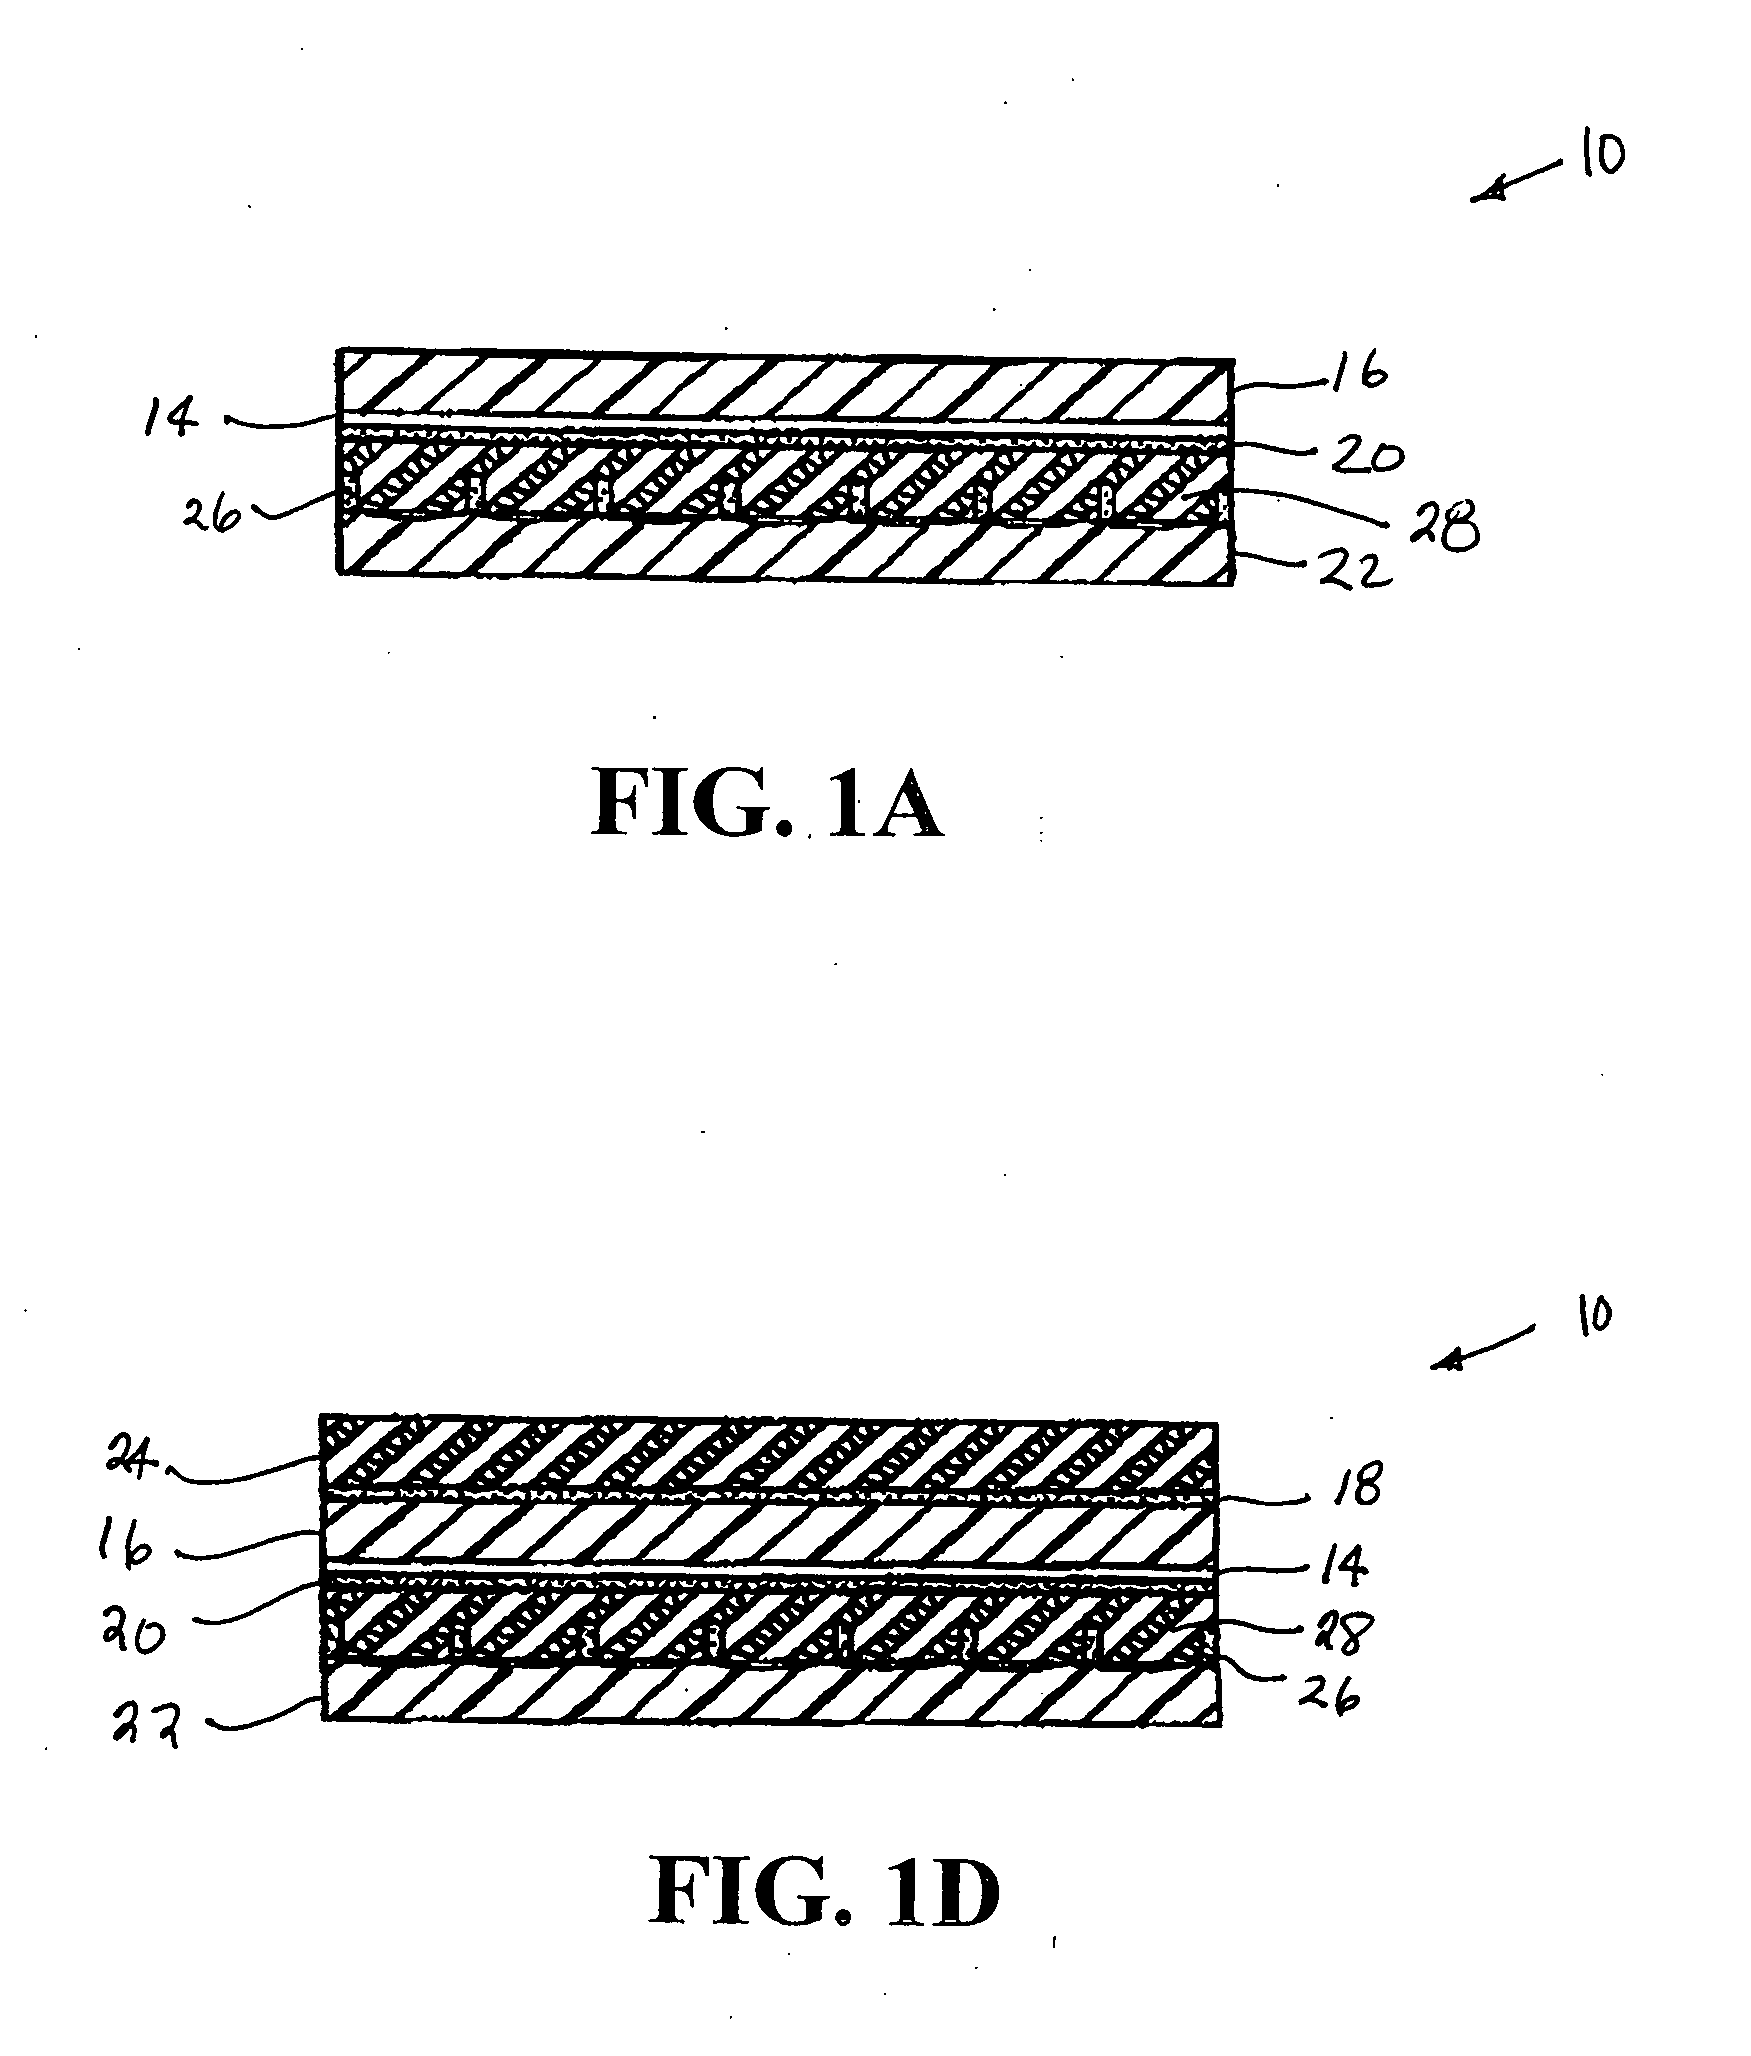 Microwave cooking packages and methods of making thereof